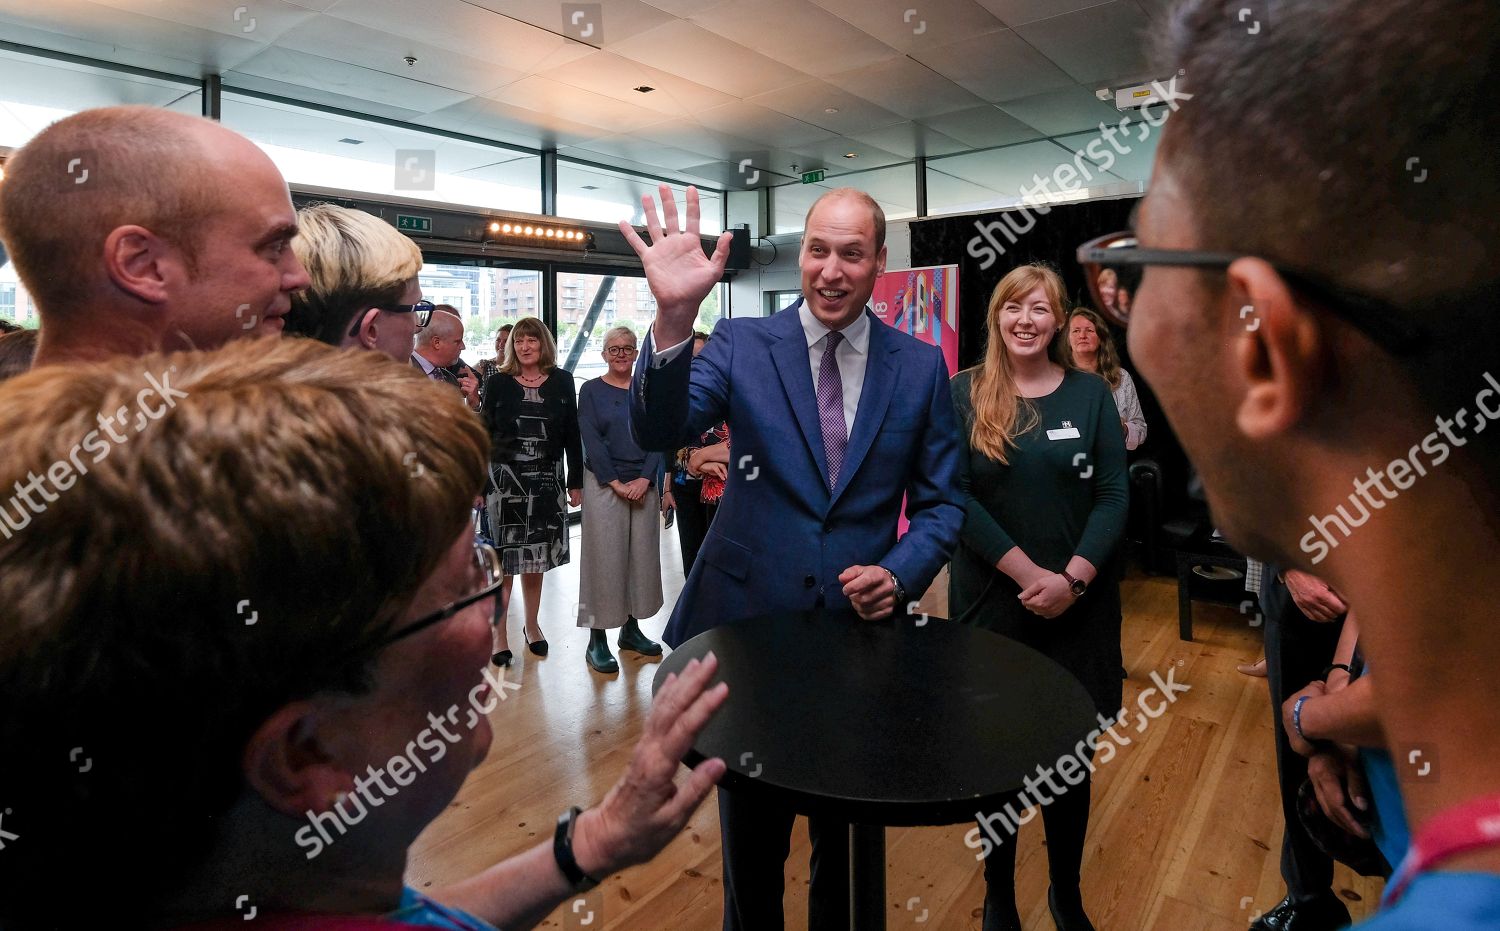 prince-william-visit-to-the-great-exhibition-of-the-north-newcastle-uk-shutterstock-editorial-9876204f.jpg